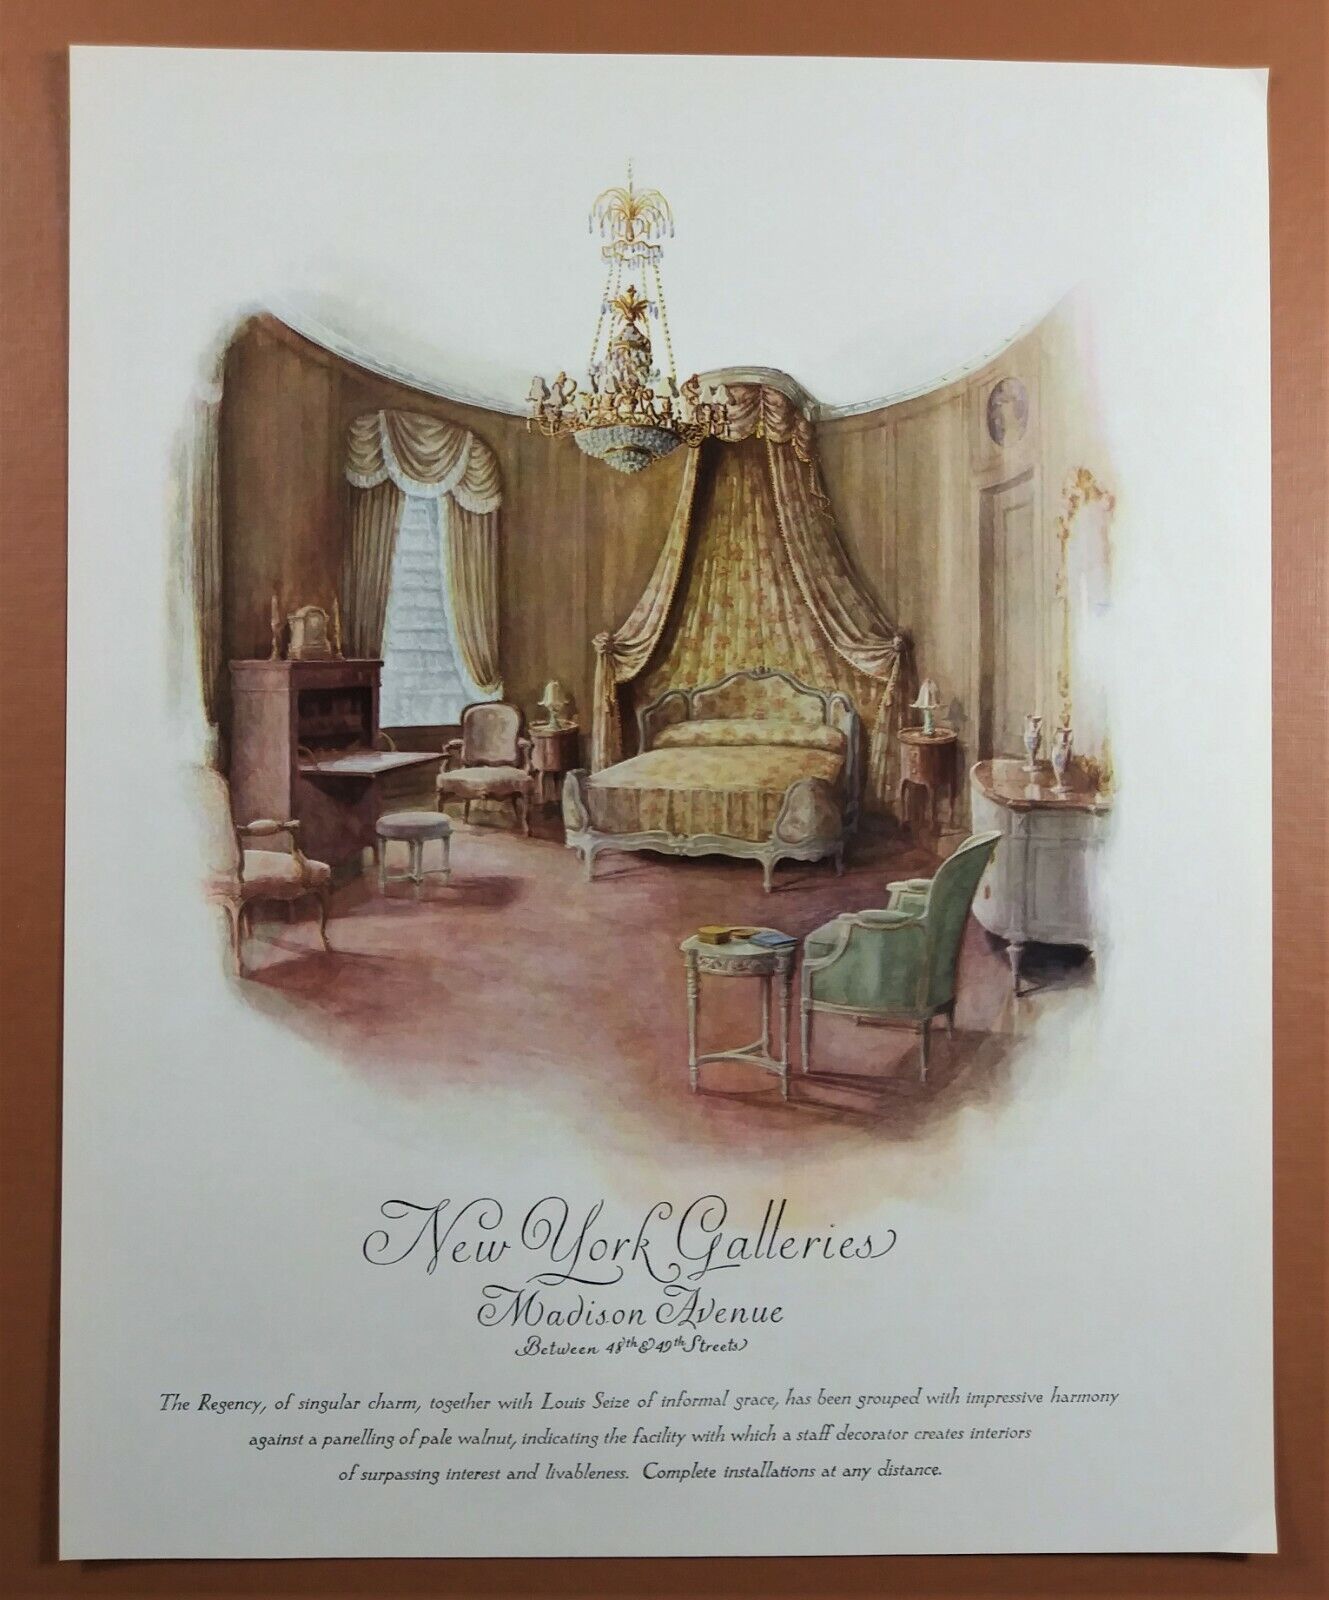 Antique 1930's Furniture New York Galleries Regency Bedroom Suite 1931 Print AD for sale  Shipping to United Kingdom